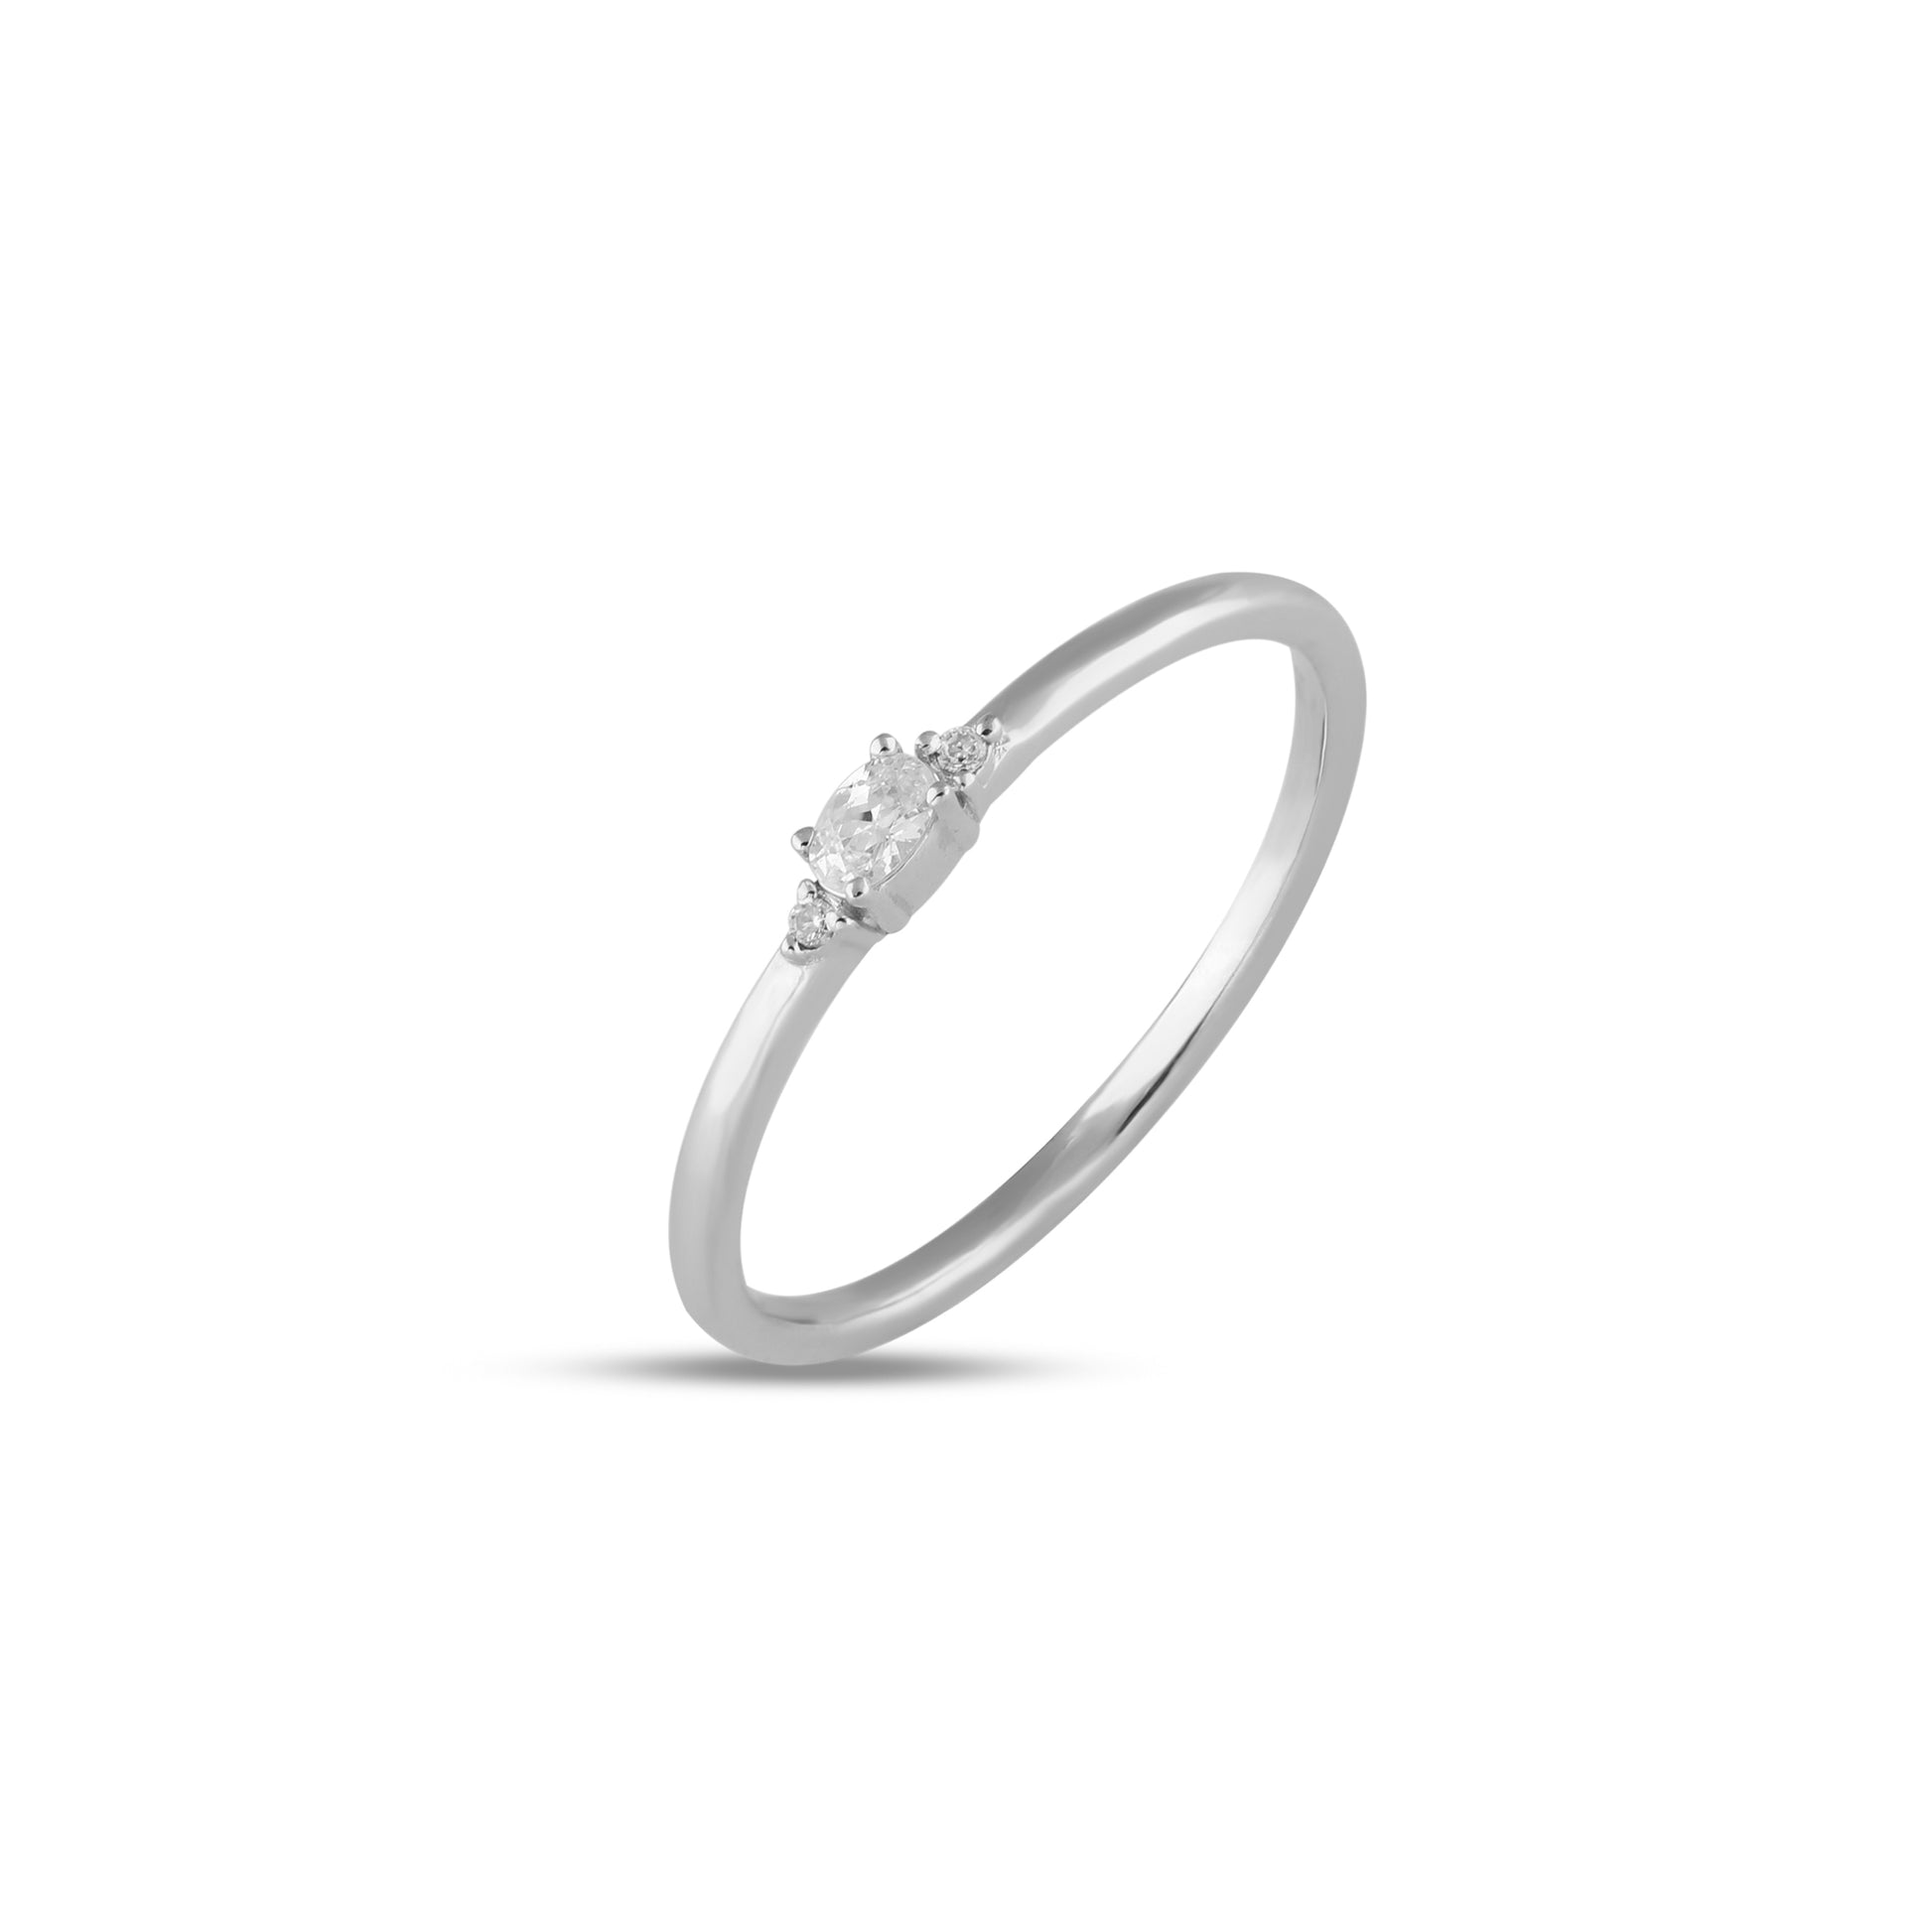 White gold trio engagement ring